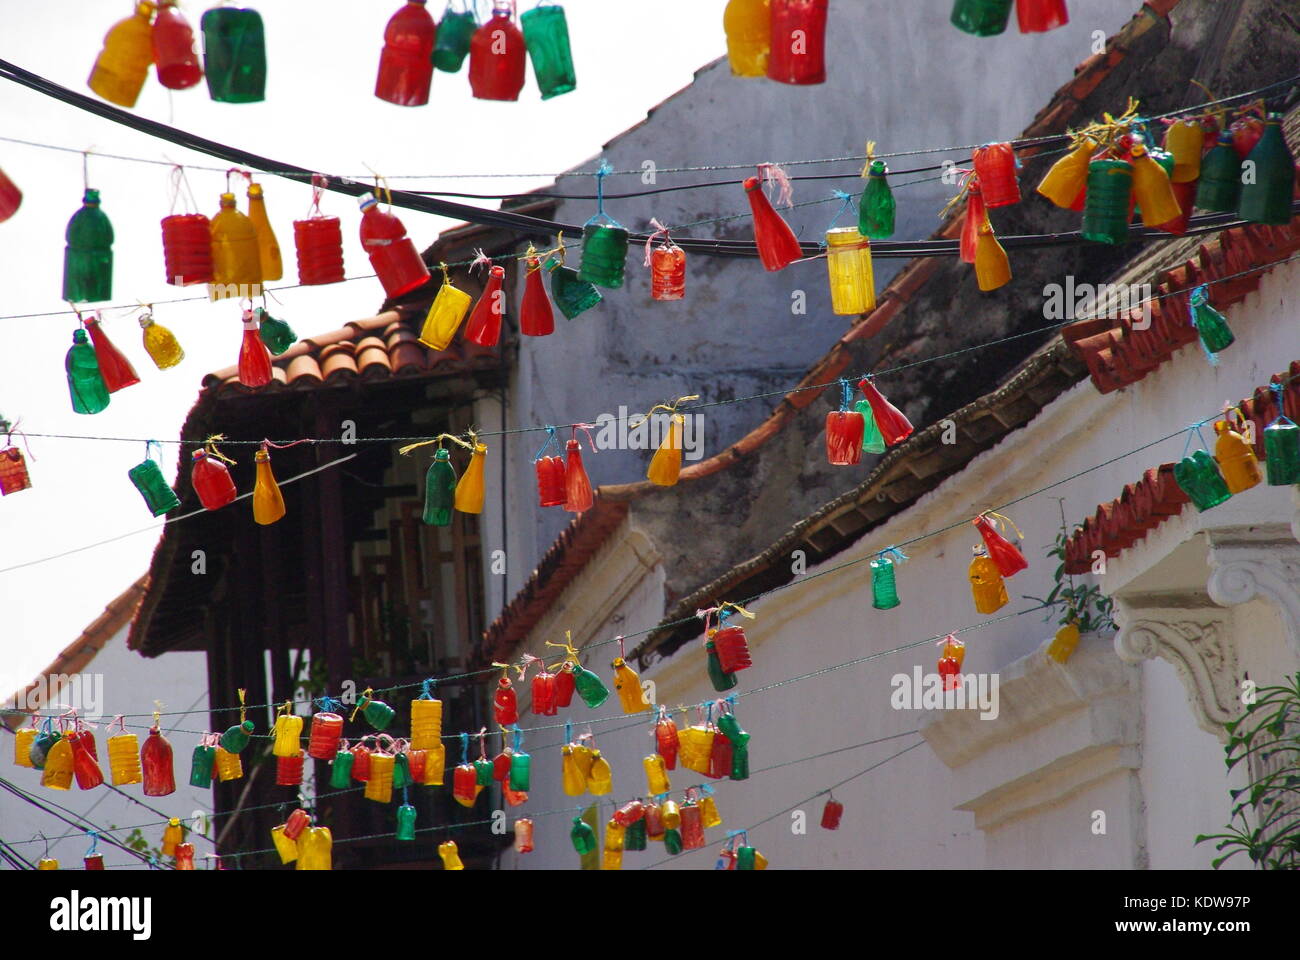 Recycled Plastic Bottles used as Street Decorations, Cartagena Stock Photo